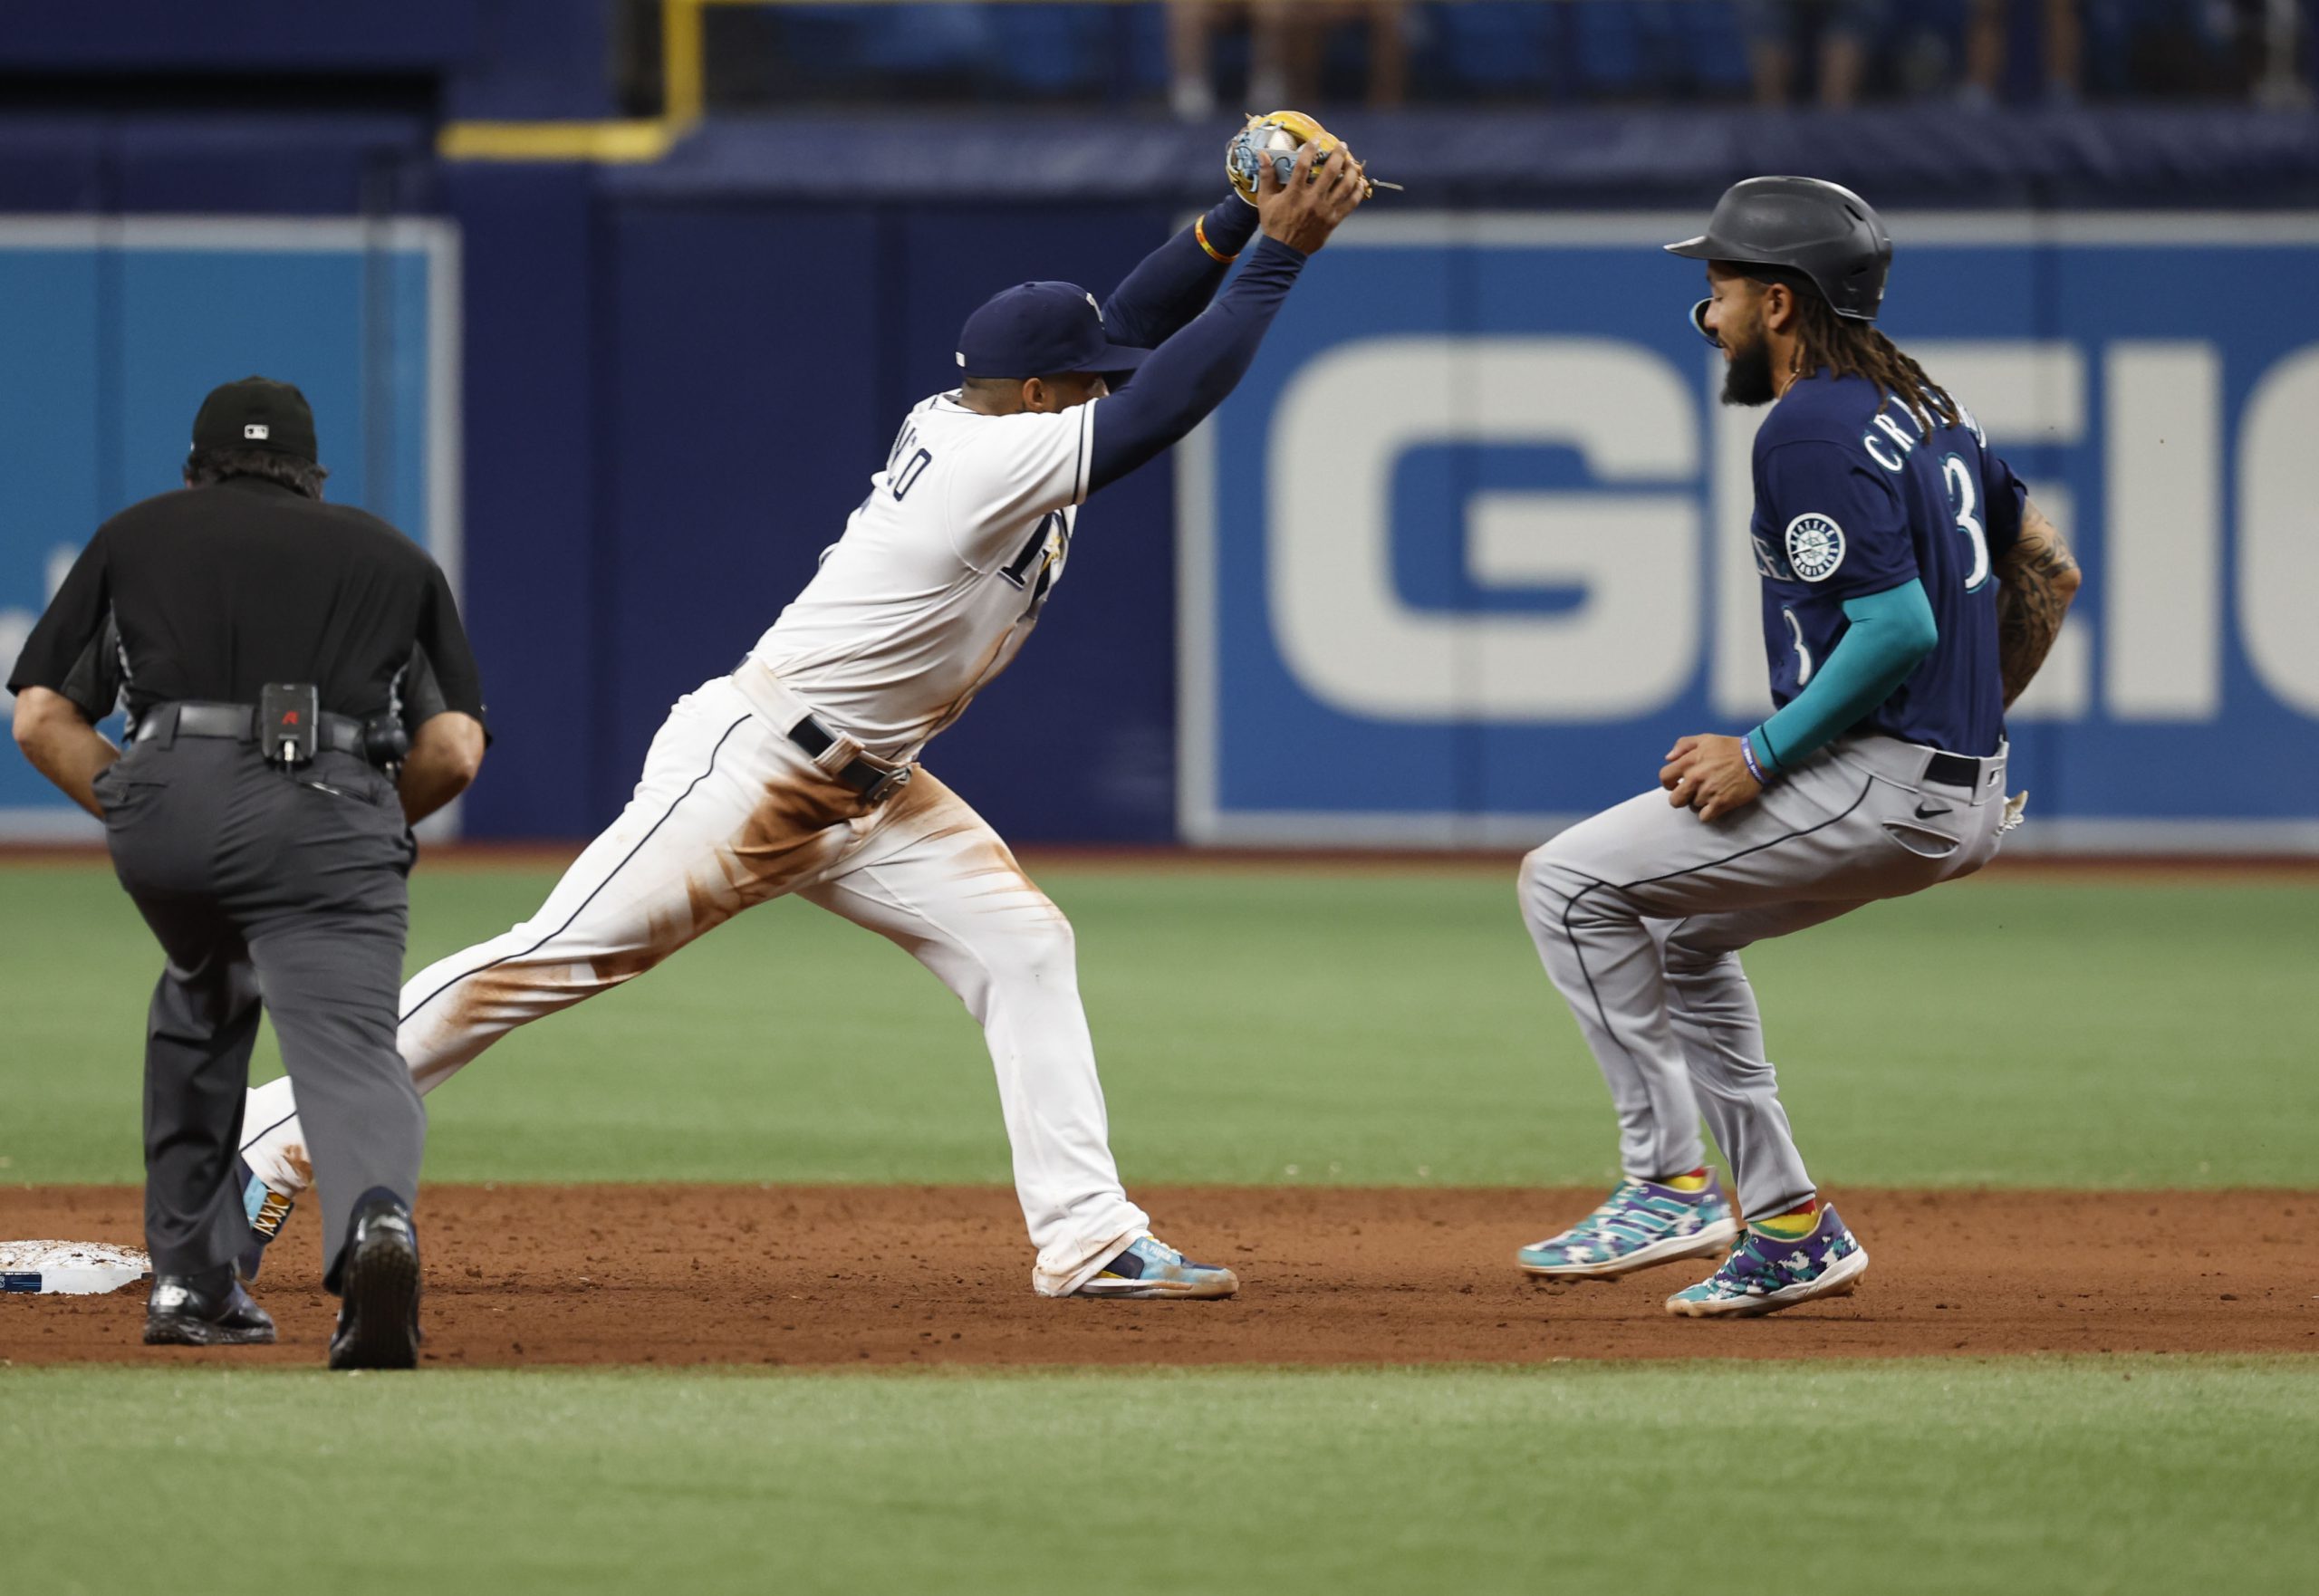 Rene Pinto Preview, Player Props: Rays vs. Giants